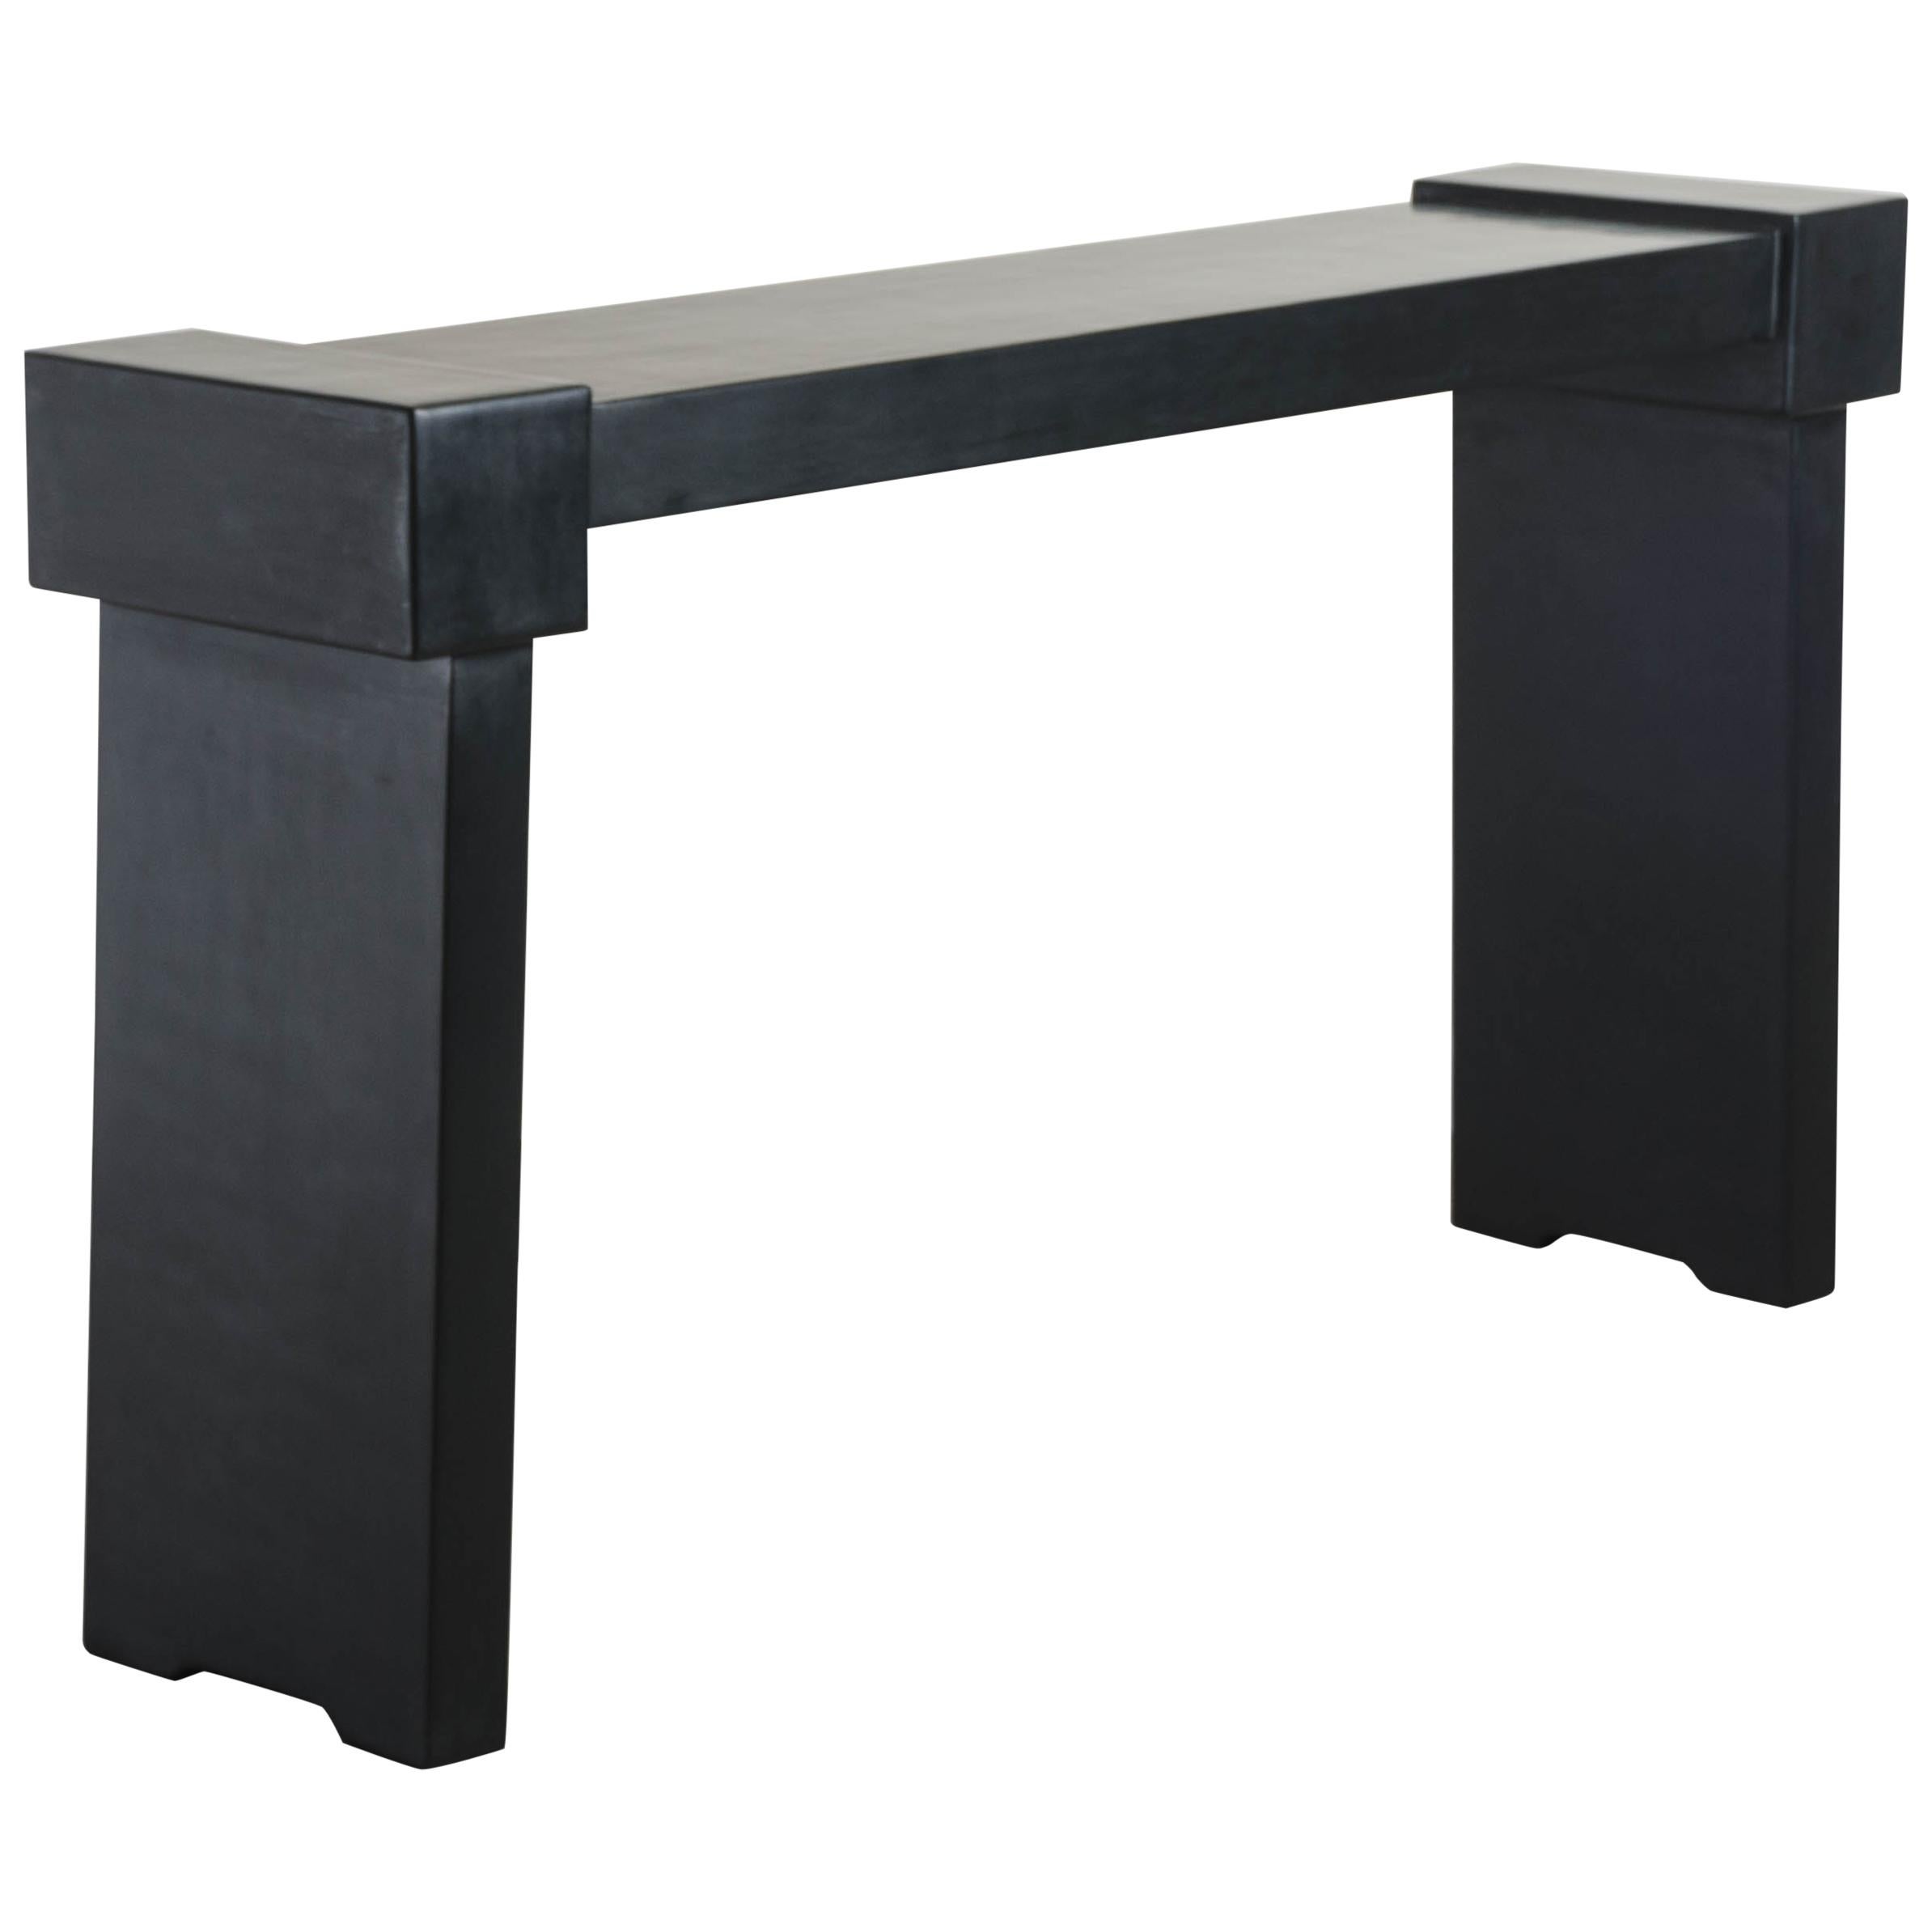 Ching Style Console, Black Lacquer by Robert Kuo, Hand Repousse, Limited Edition